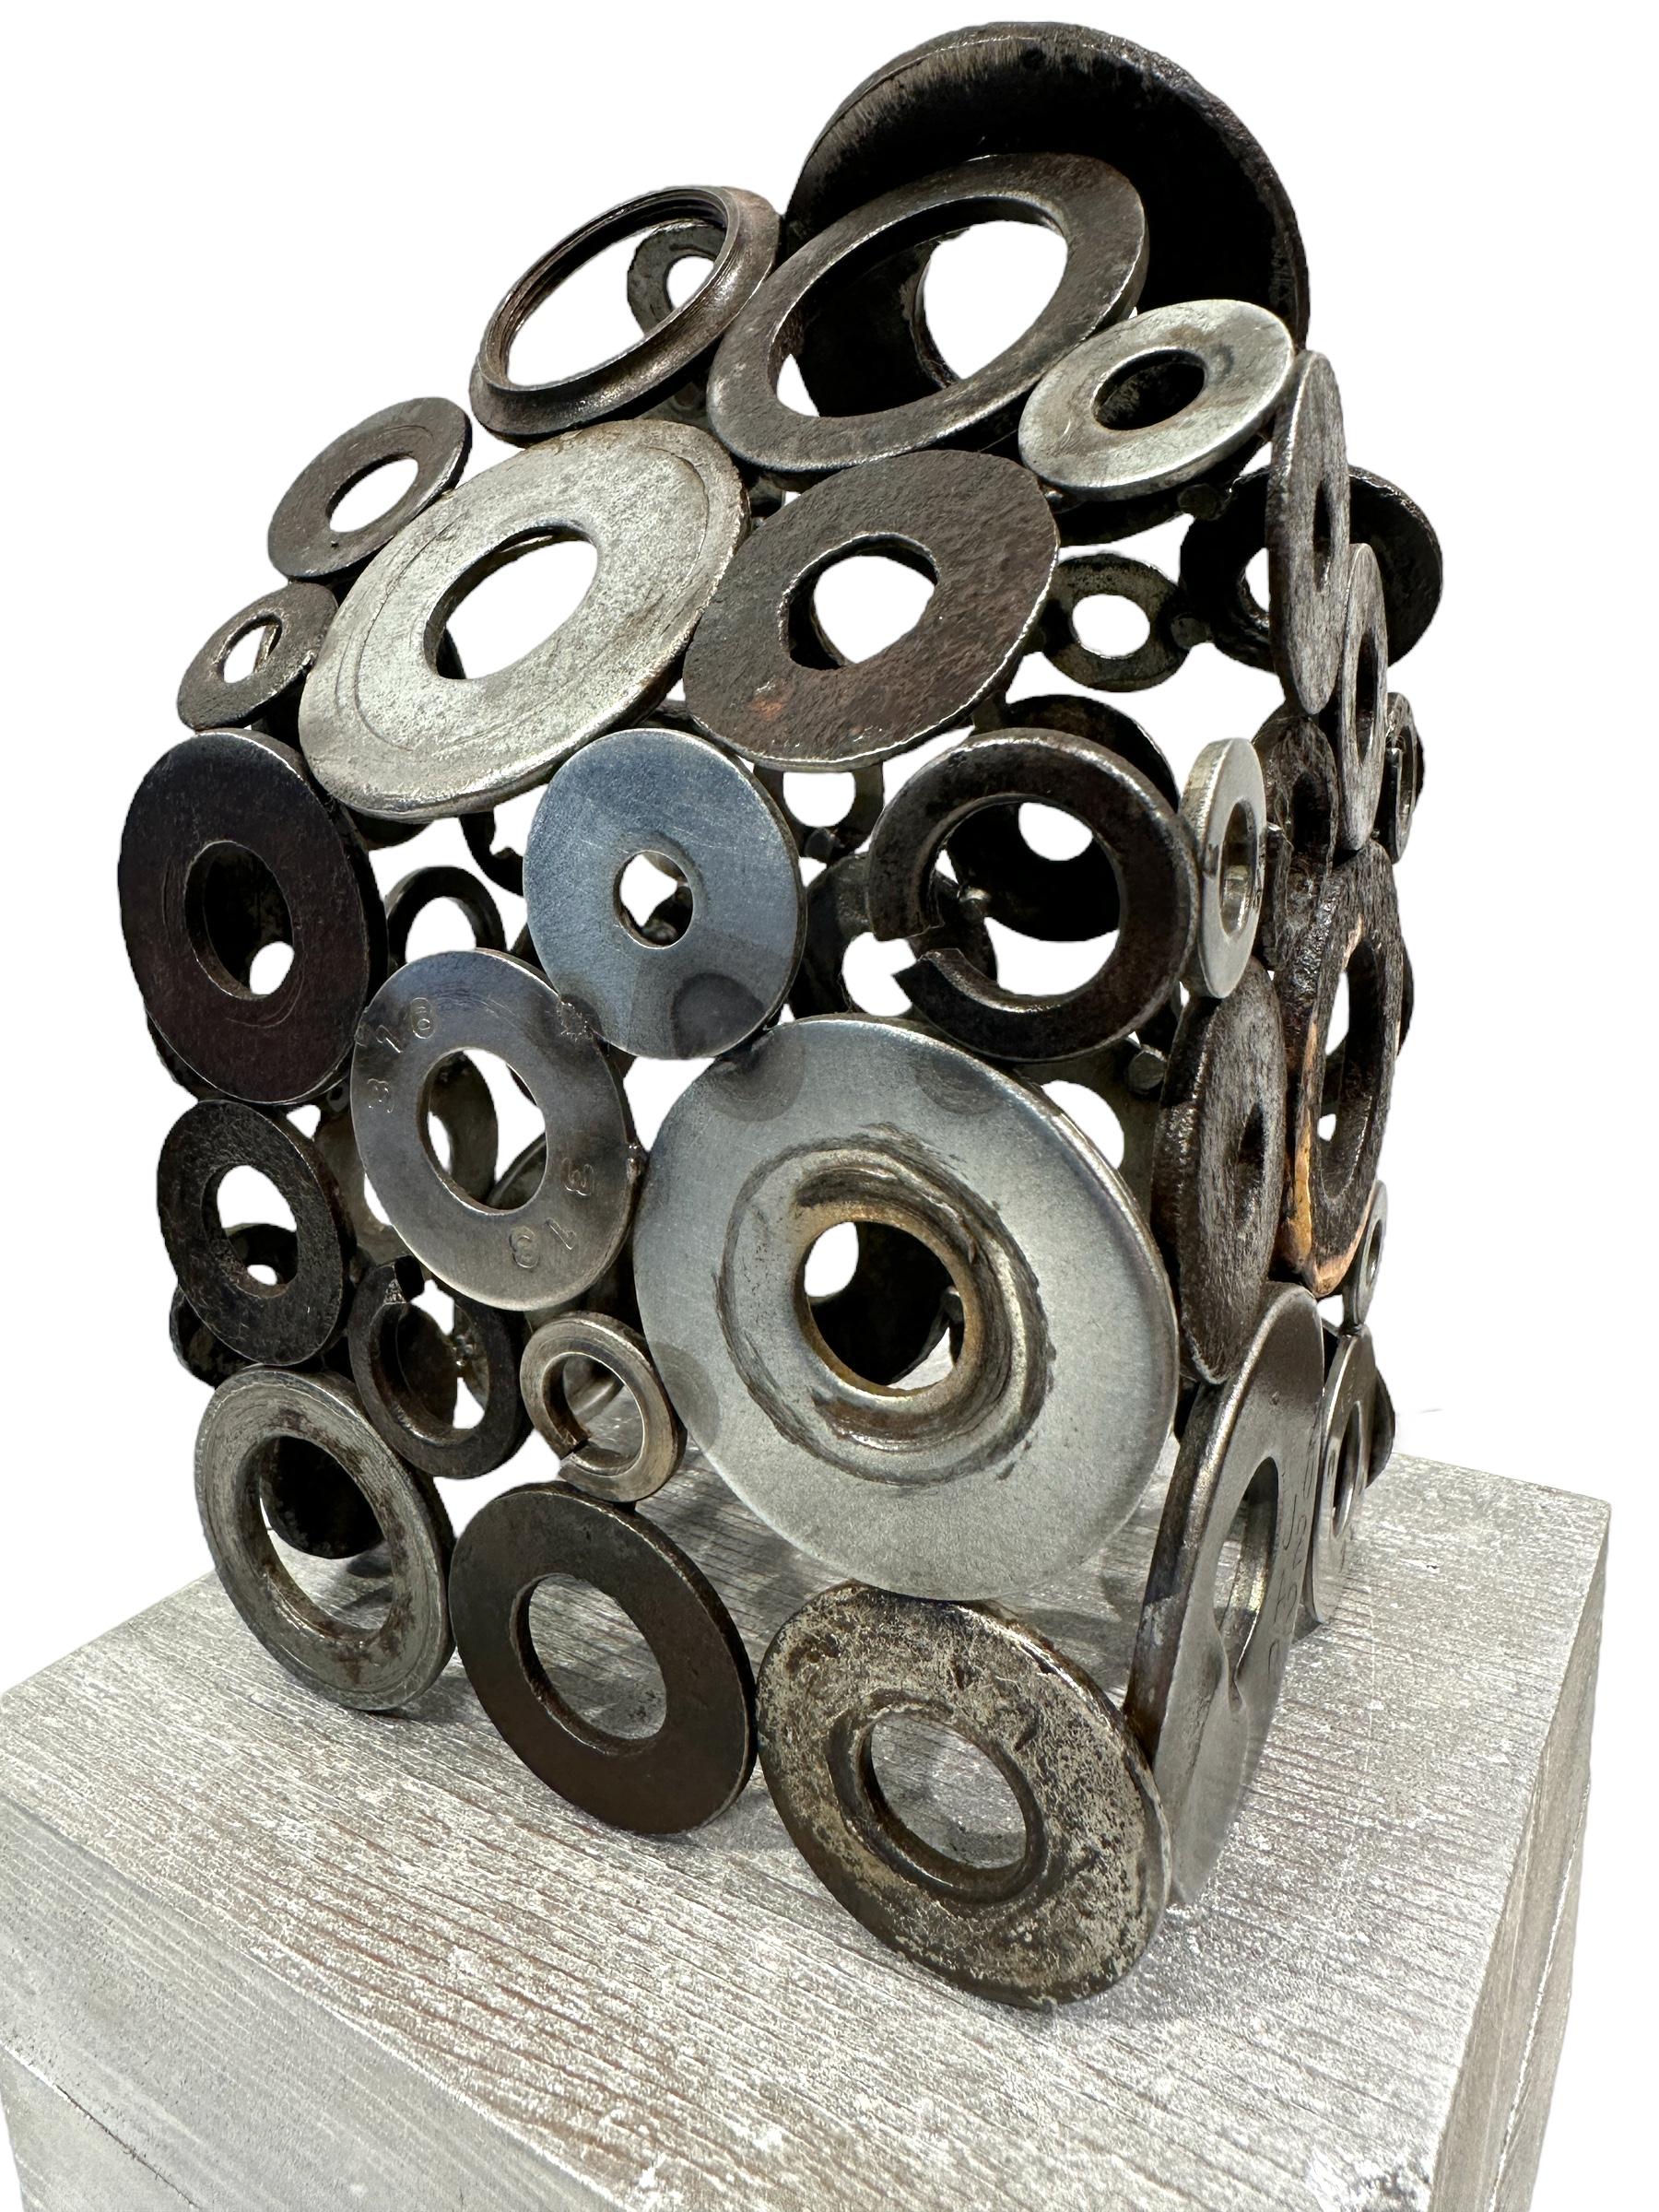 Metal Jim Rose - Construct No. 02, Salvaged Steel and Aluminum Industrial Objects For Sale